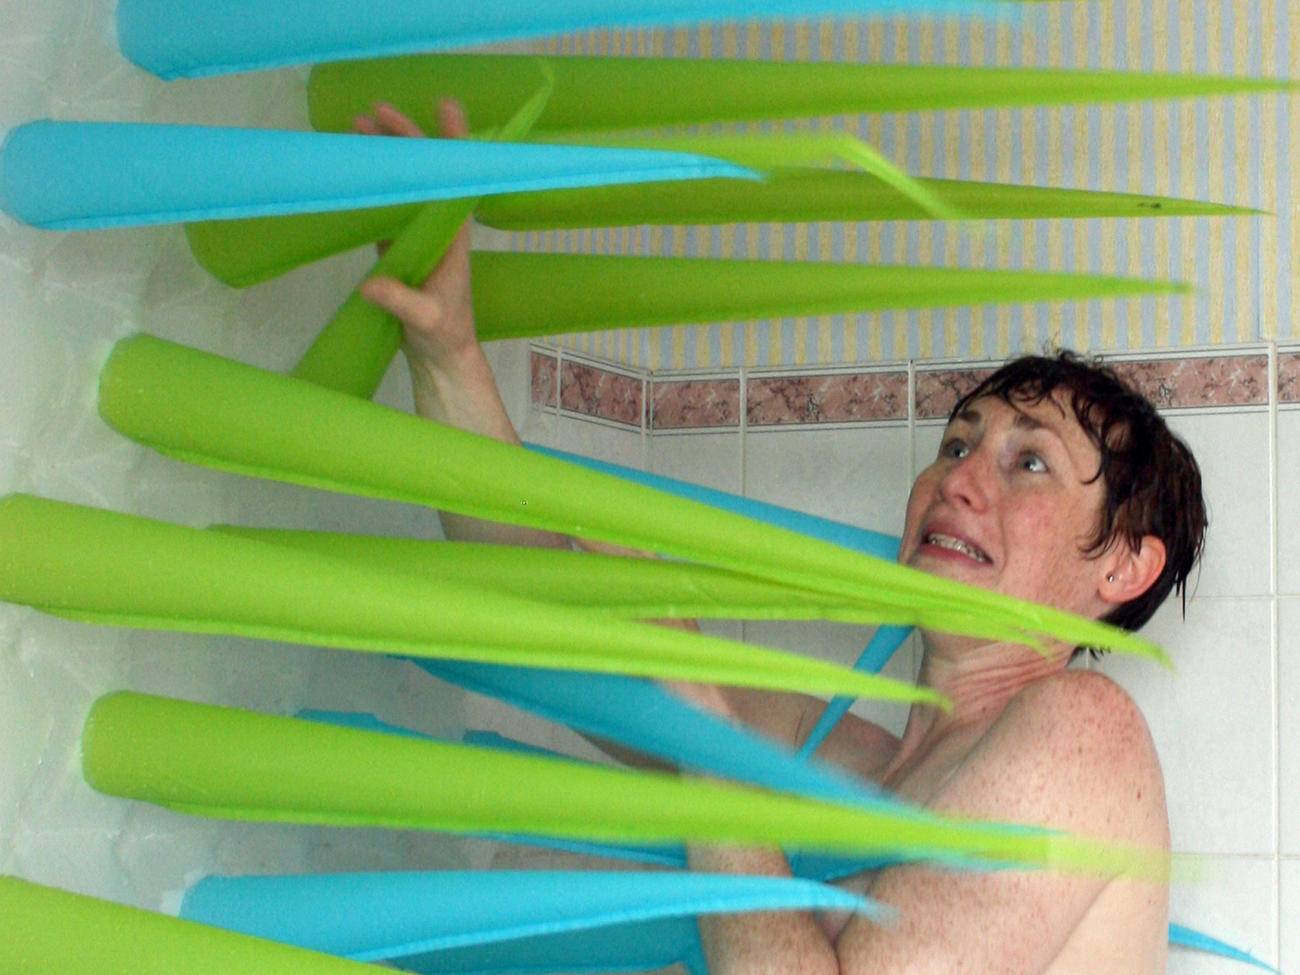 Could this inflatable shower curtain scare you into saving water?